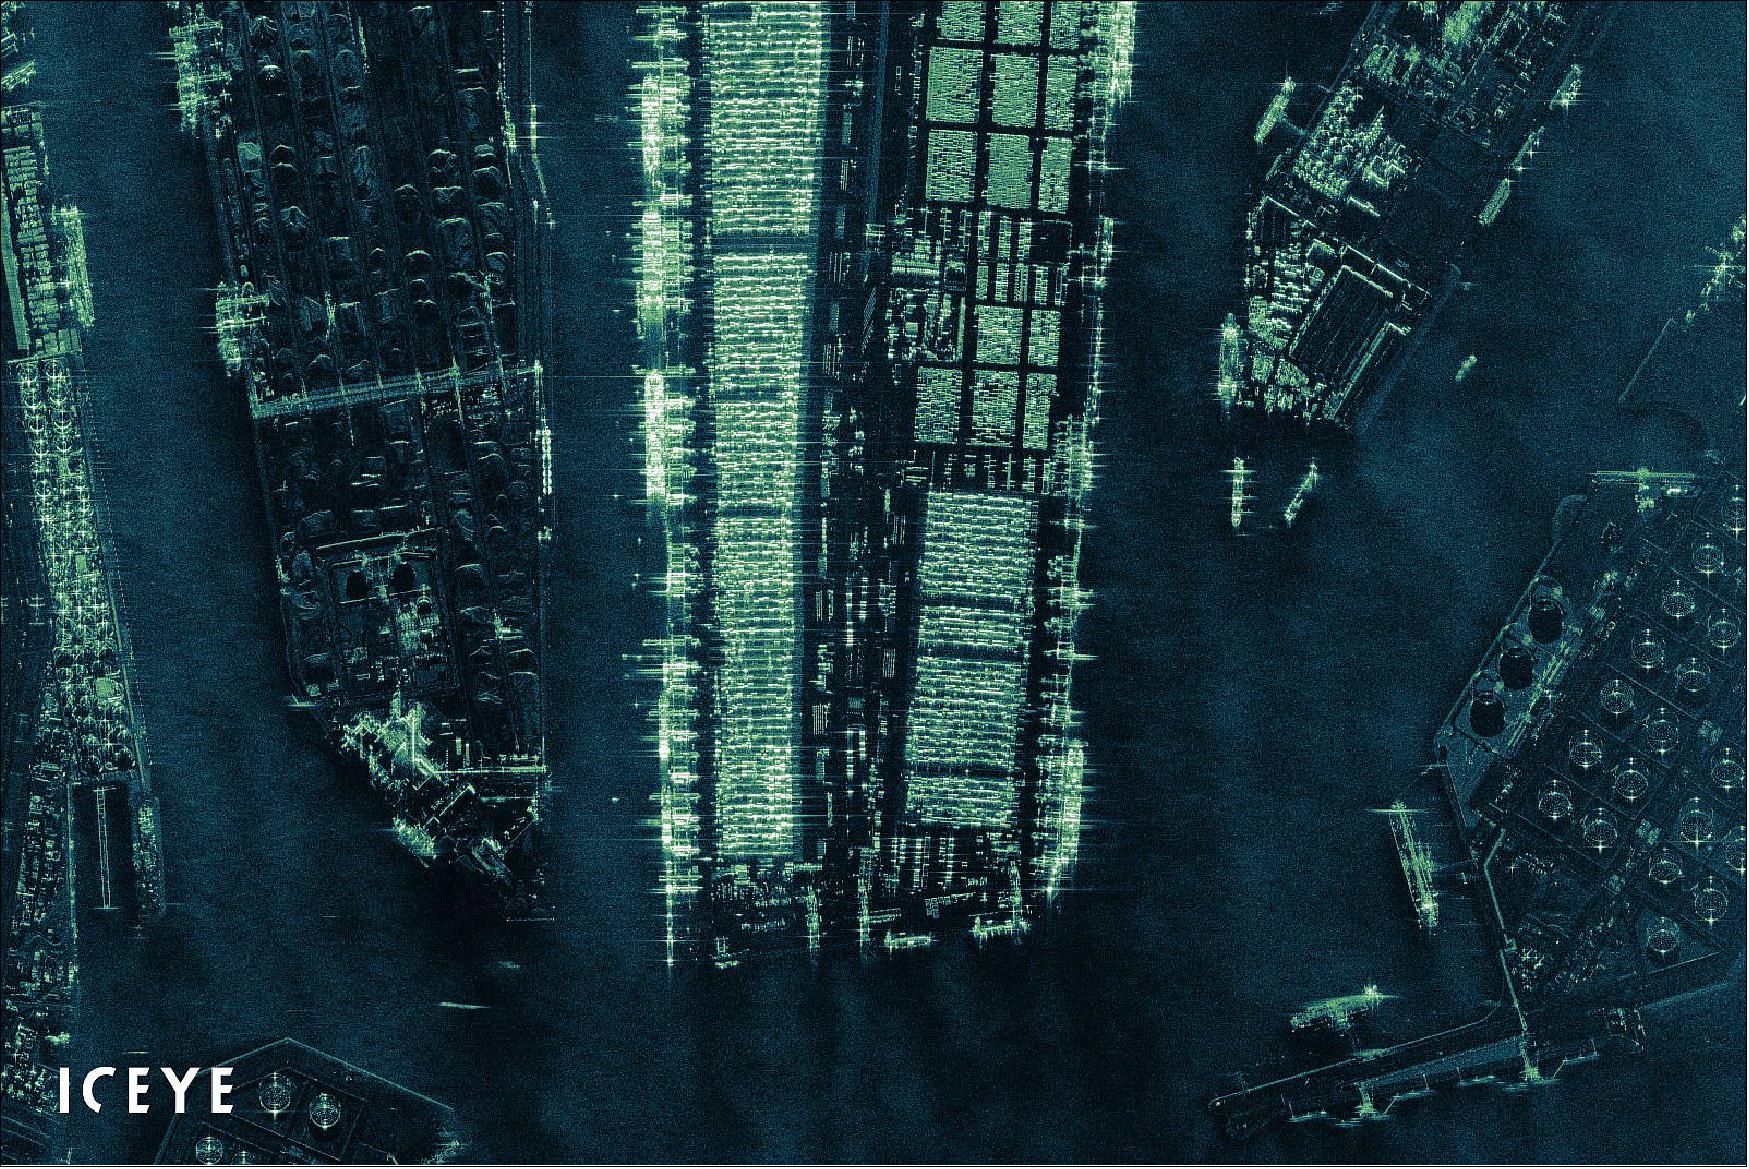 Figure 24: A radar satellite image of the largest seaport in Europe - Port of Rotterdam, the Netherlands. The image was acquired with an ICEYE SAR satellite in the Spot imaging mode (image credit: ICEYE)